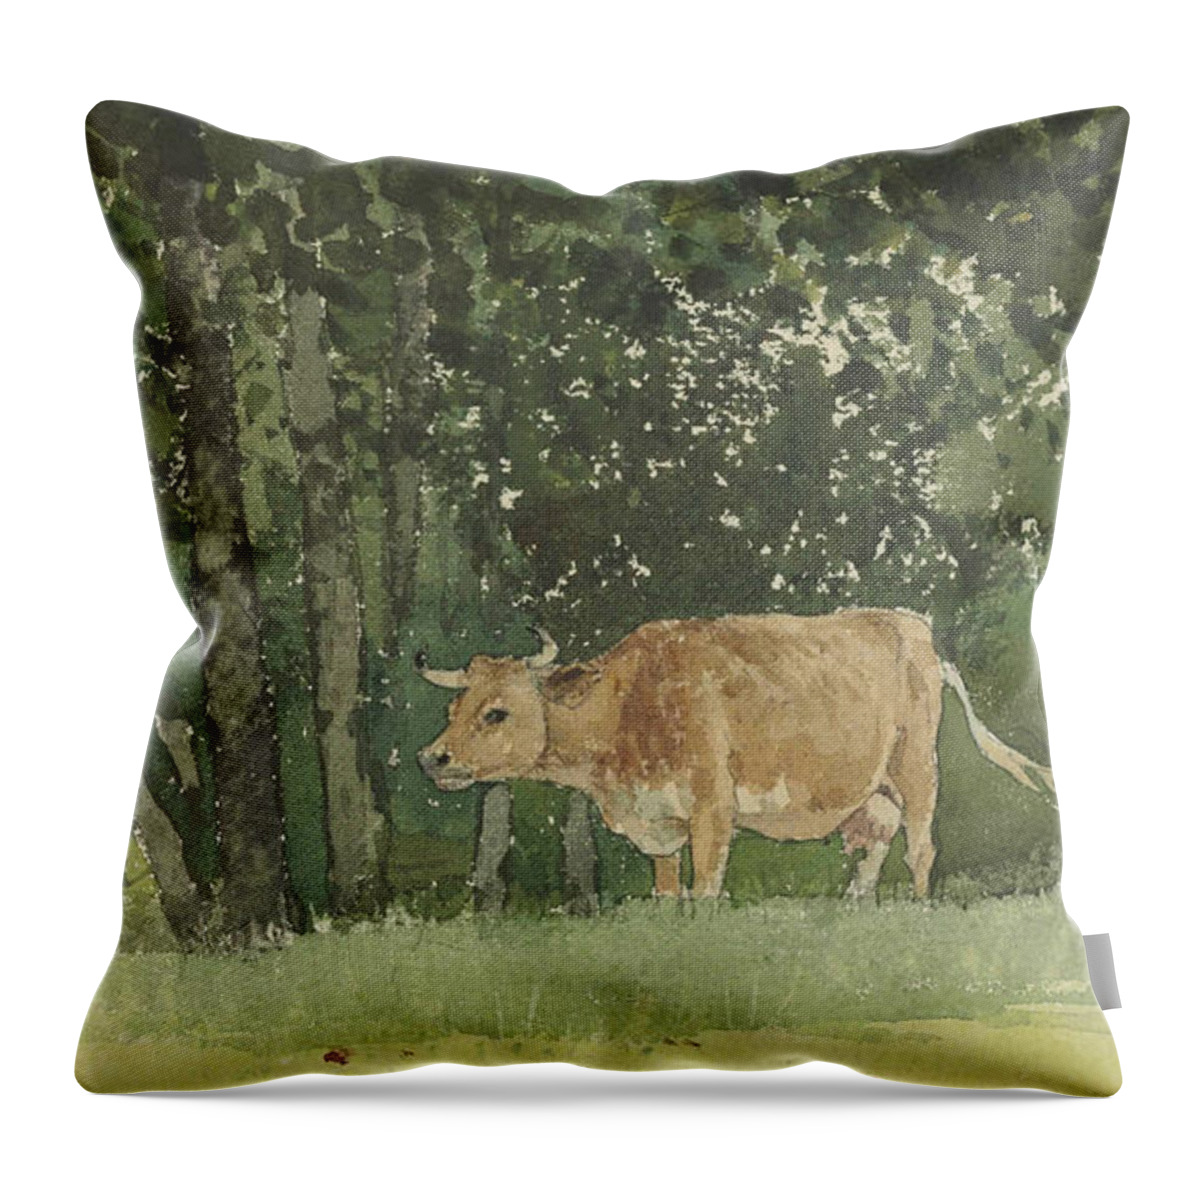 19th Century American Painters Throw Pillow featuring the painting Cow in Pasture by Winslow Homer